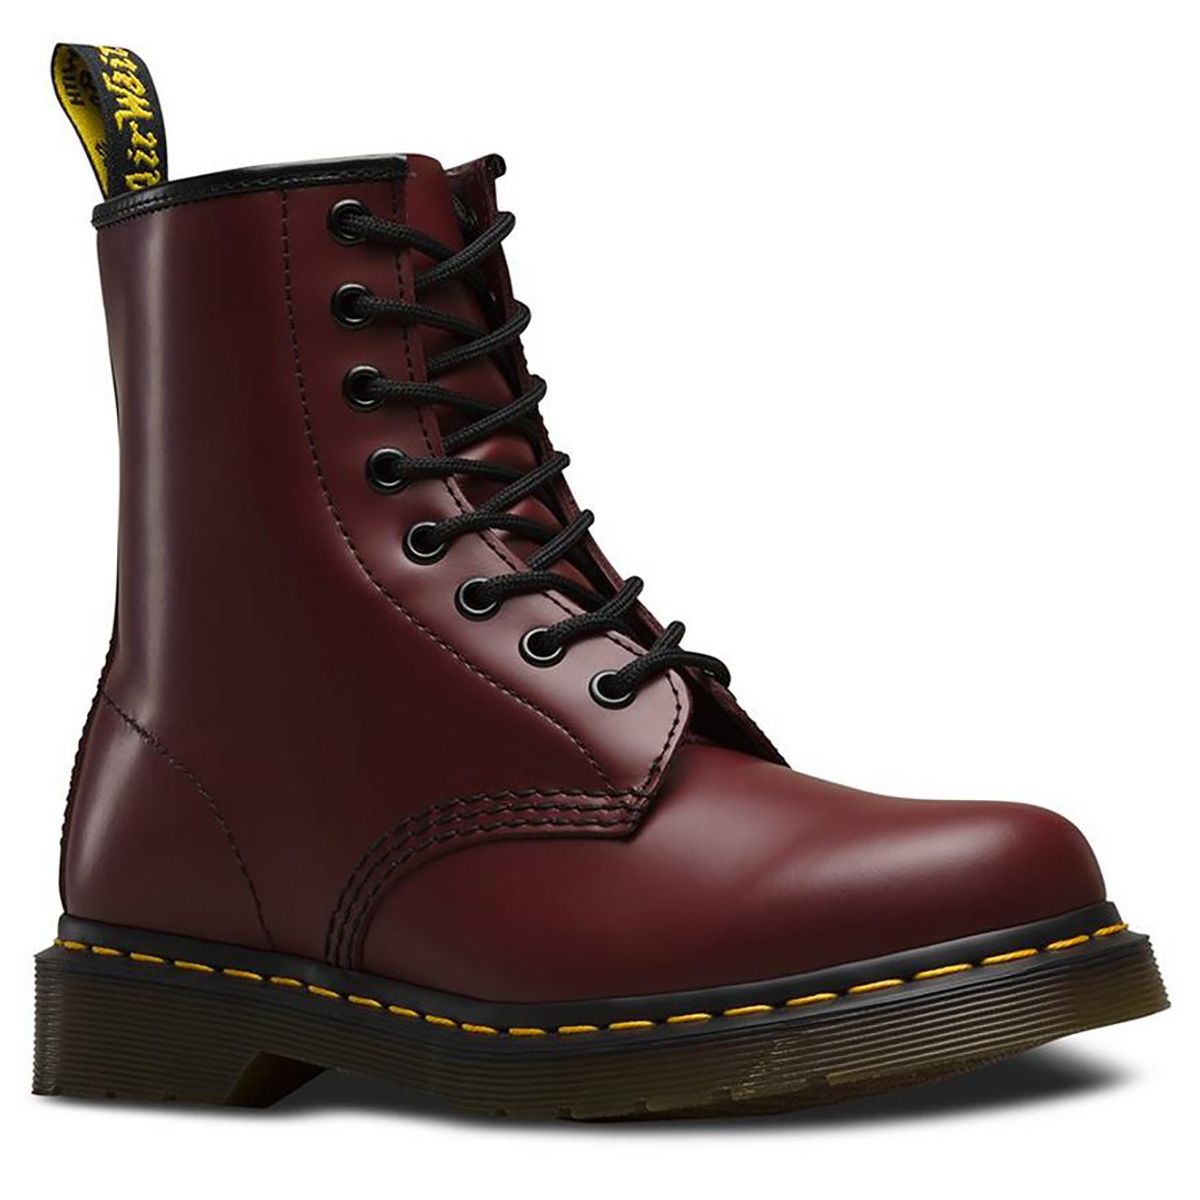 Boots DR. MARTENS - 1460 Cherry Red Smooth - Rock A Gogo